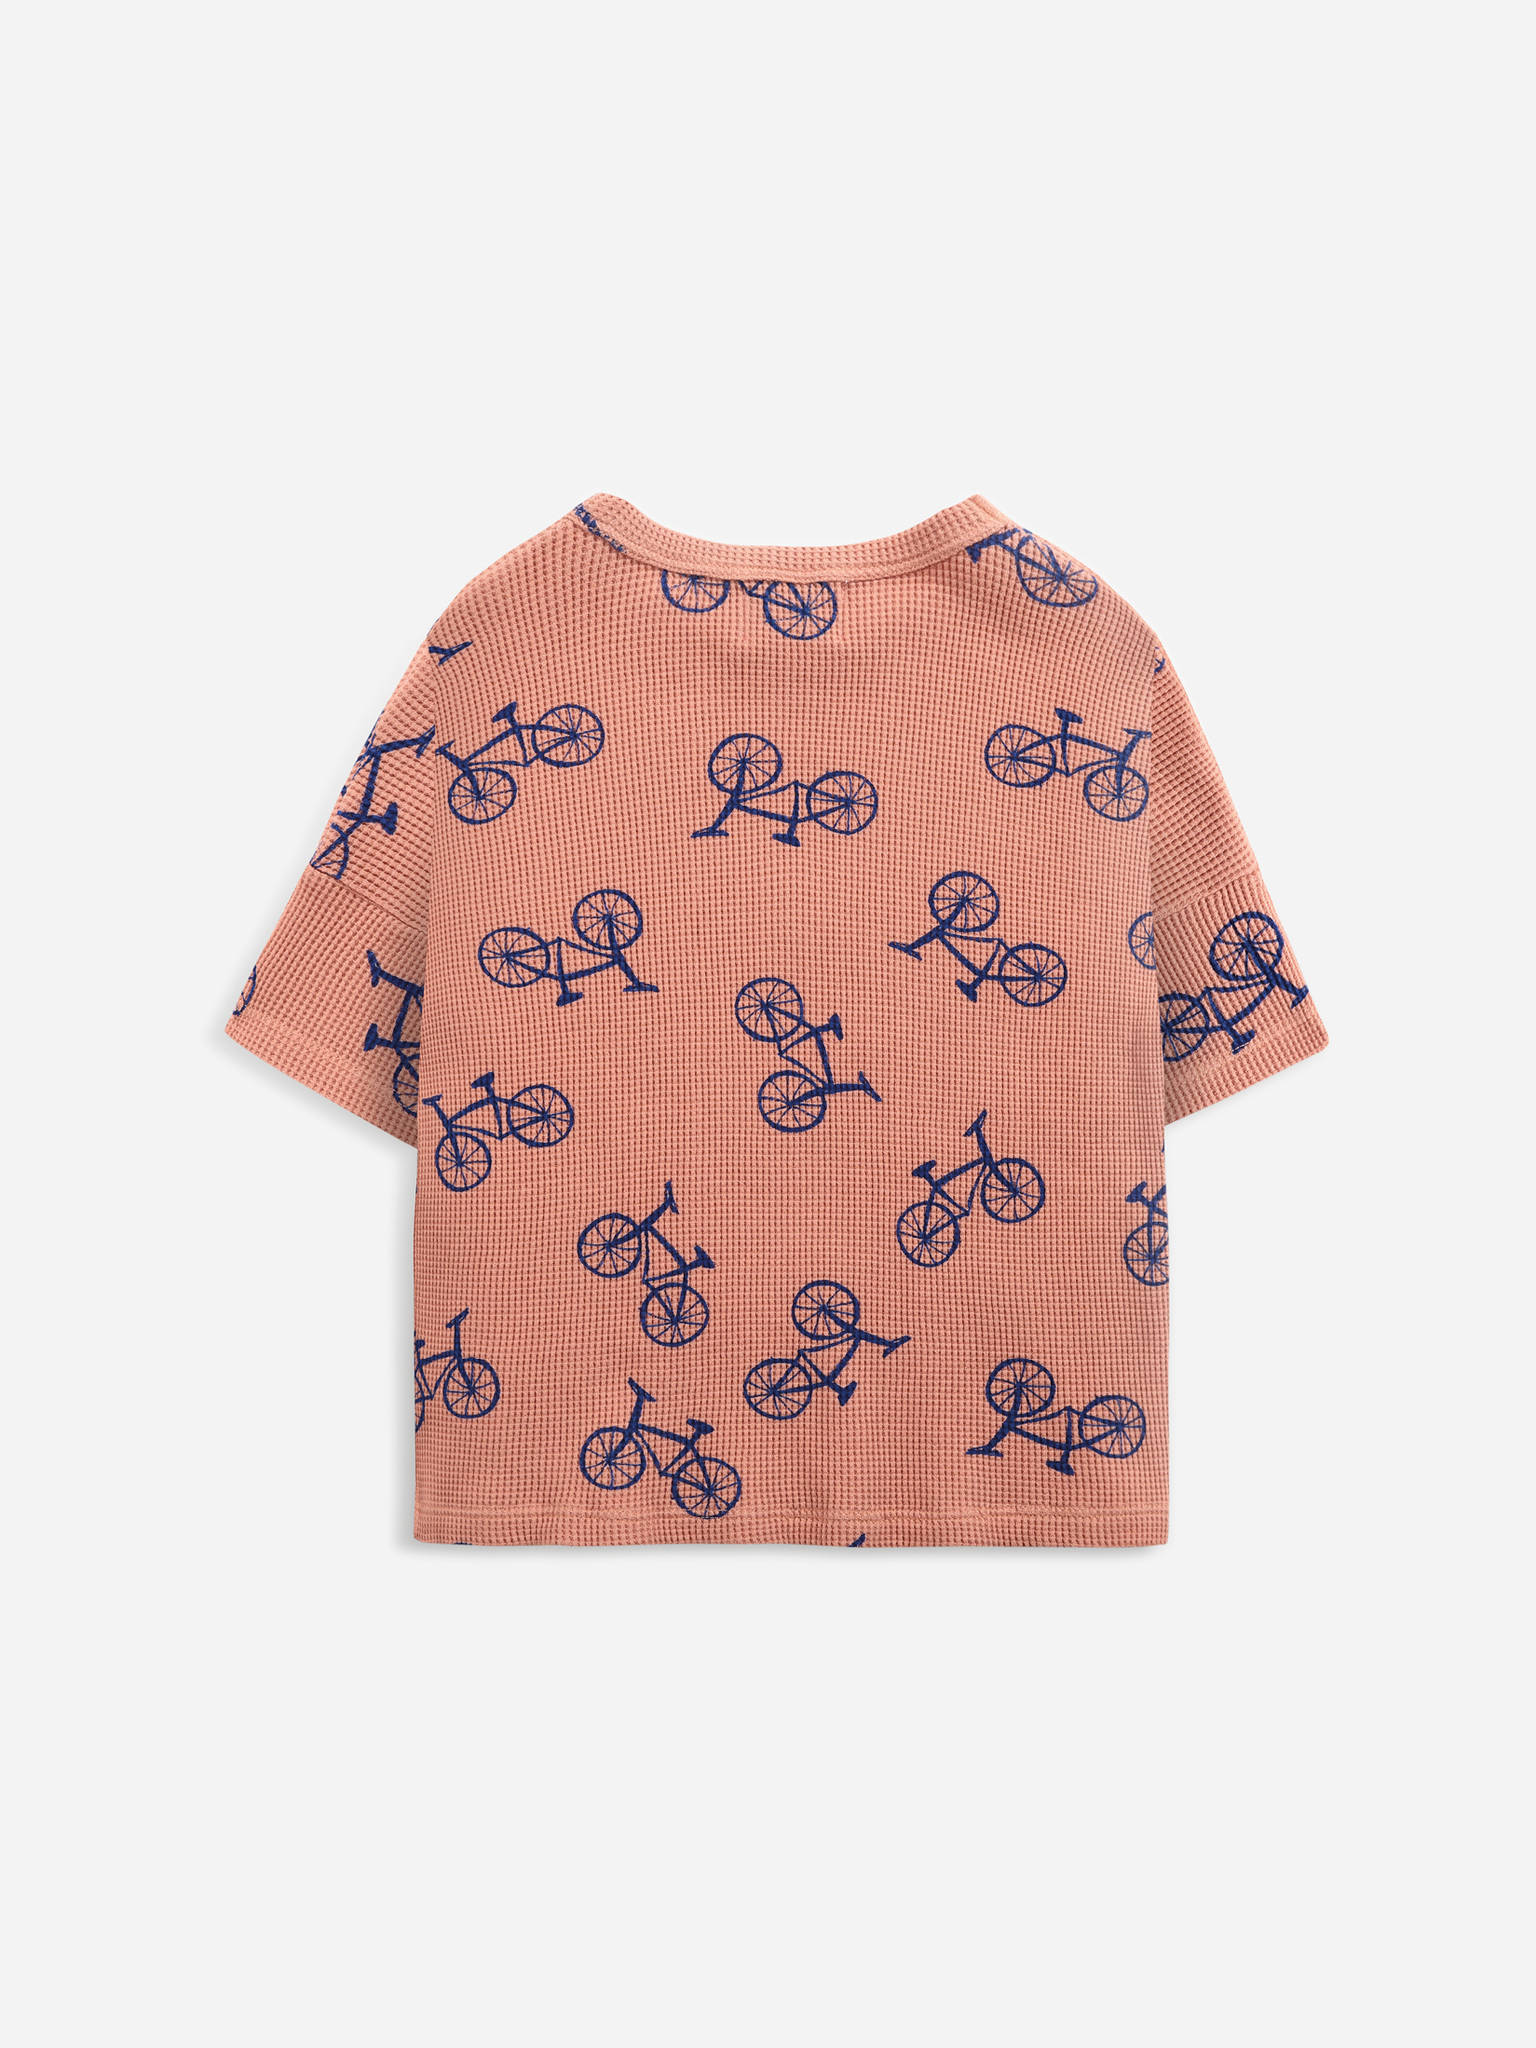 Bobo Choses Bicycle All Over Short Sleeve T-Shirt